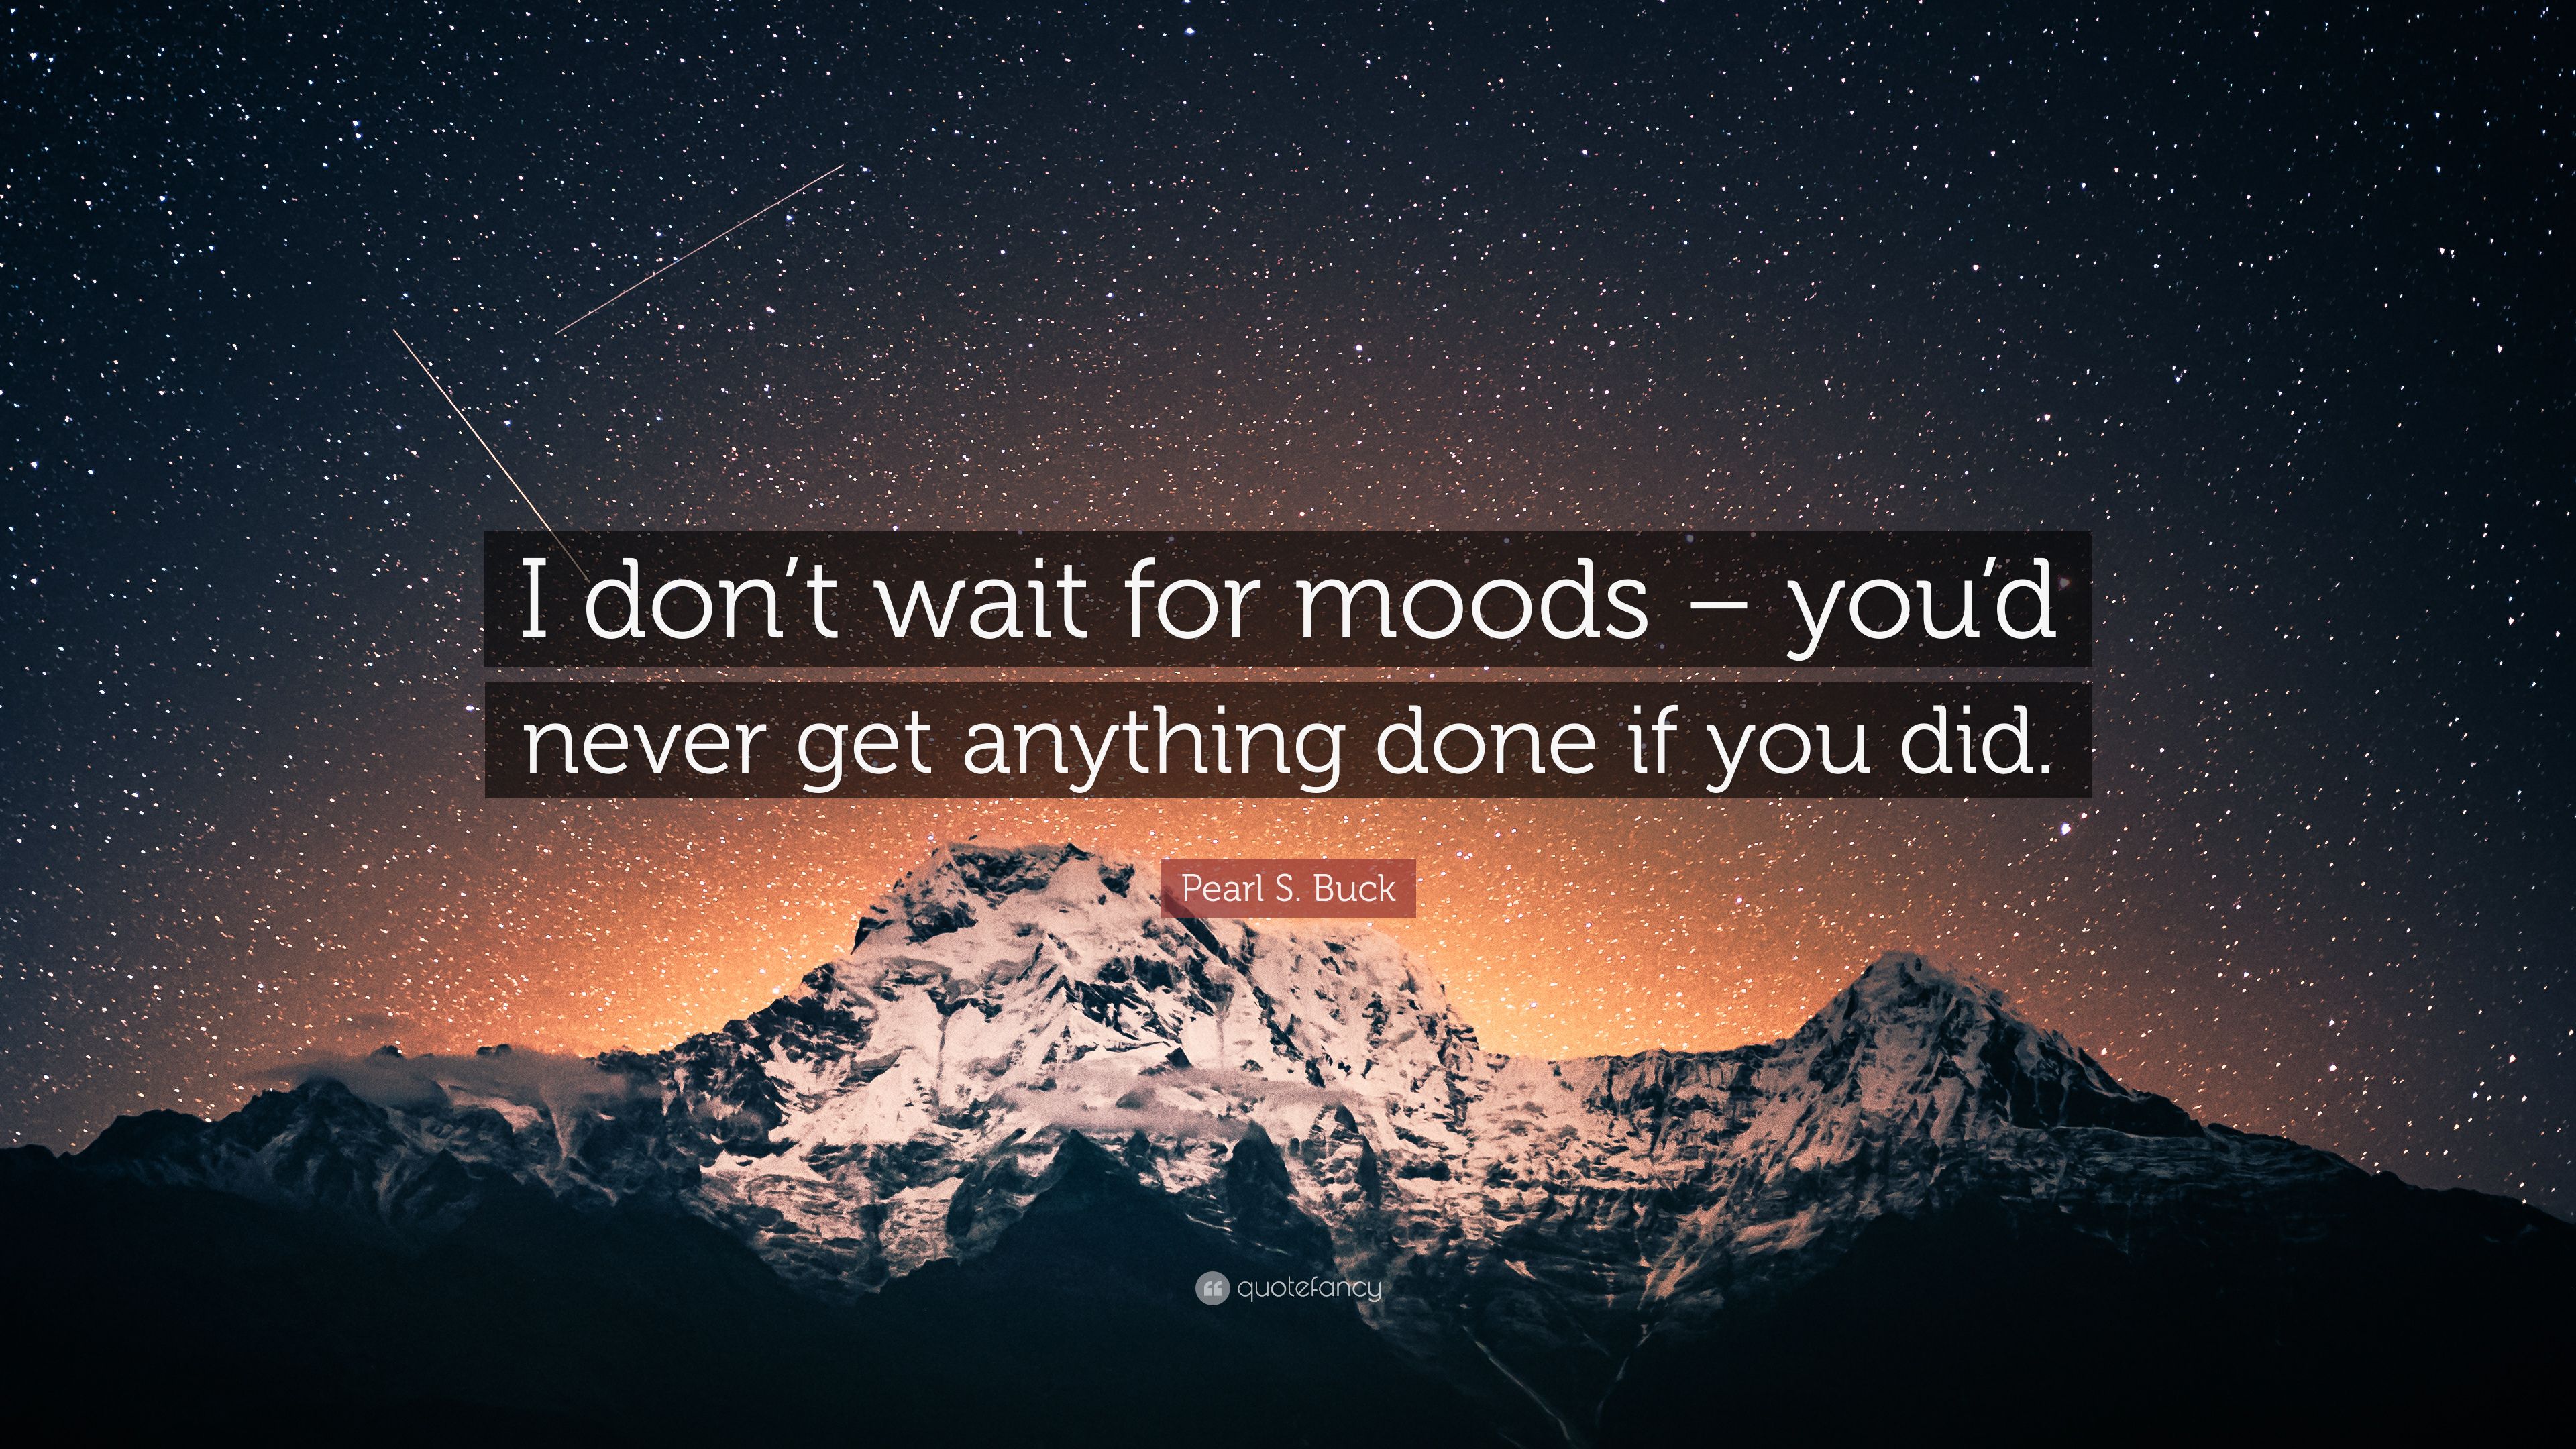 Pearl S. Buck Quote: “I don't wait for moods